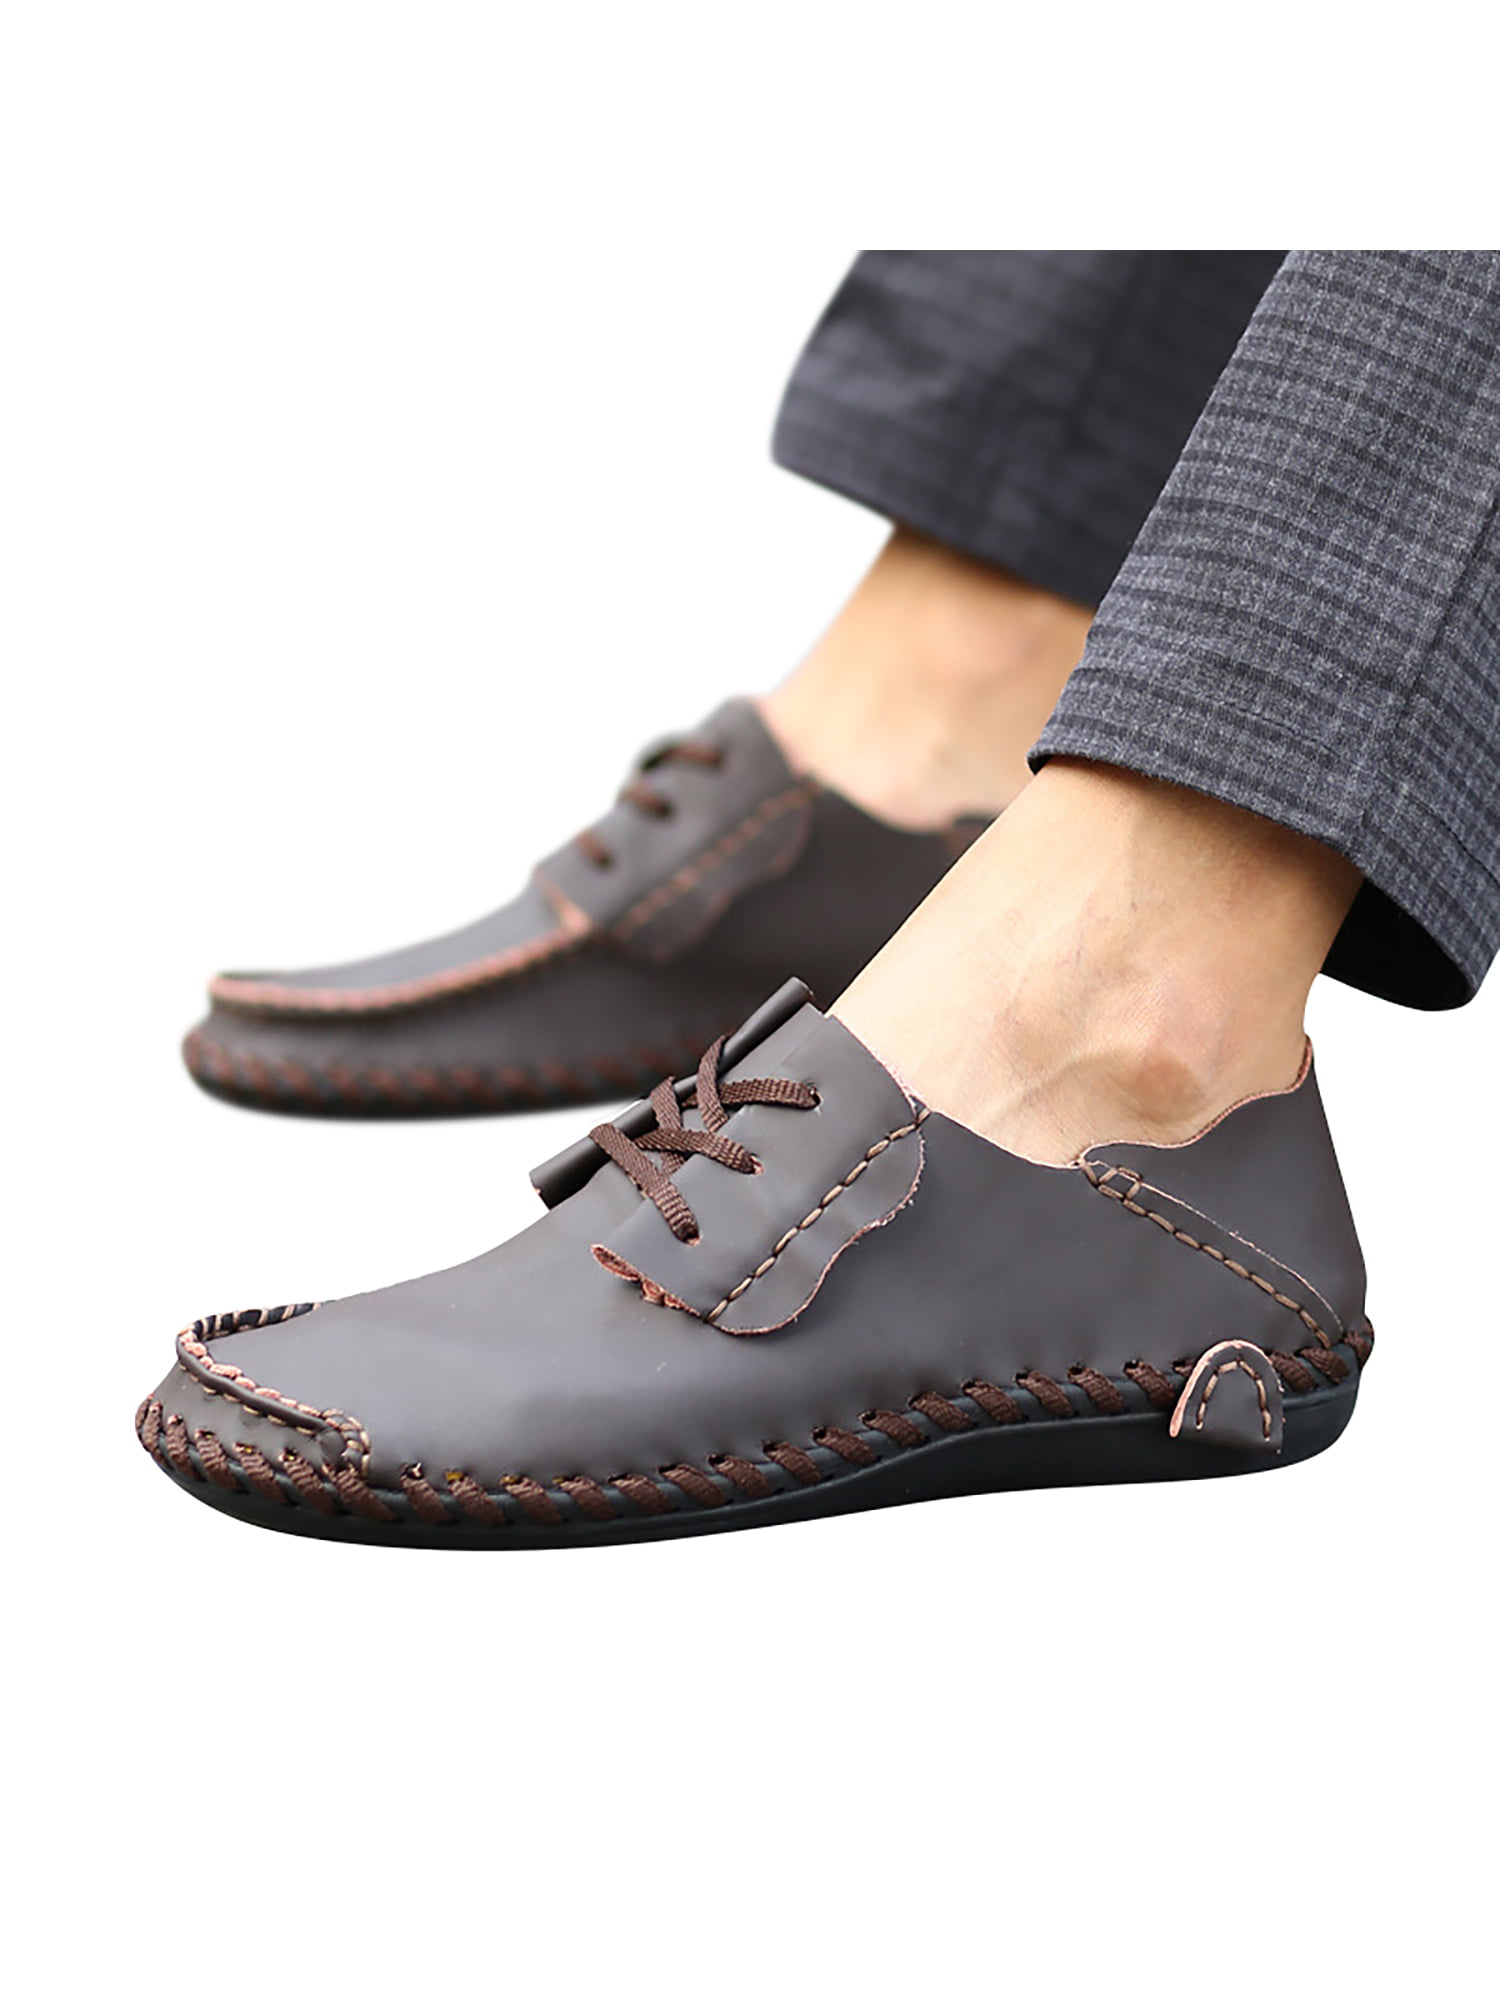 Men's Casual Oxfords Driving Leather Shoes Moccasin Peas Loafers Slip On Flats